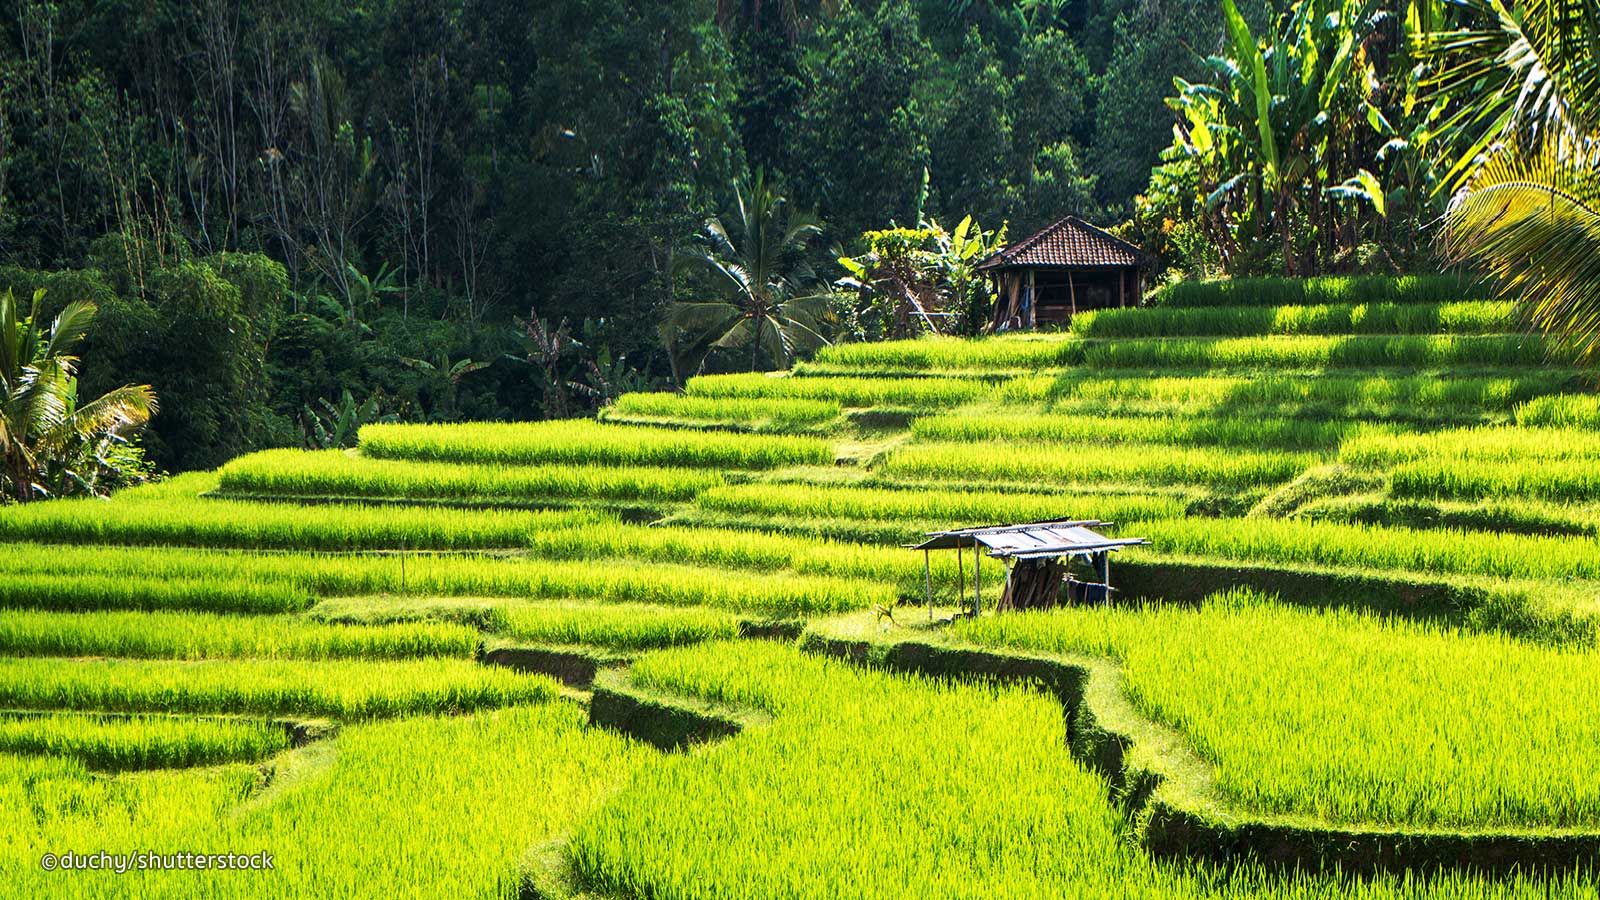 


















TEGALALANG RICE TERRACES ARE MOST
FAMOUS FOR THEIR BEAUTIFUL TERRACED  RICE
